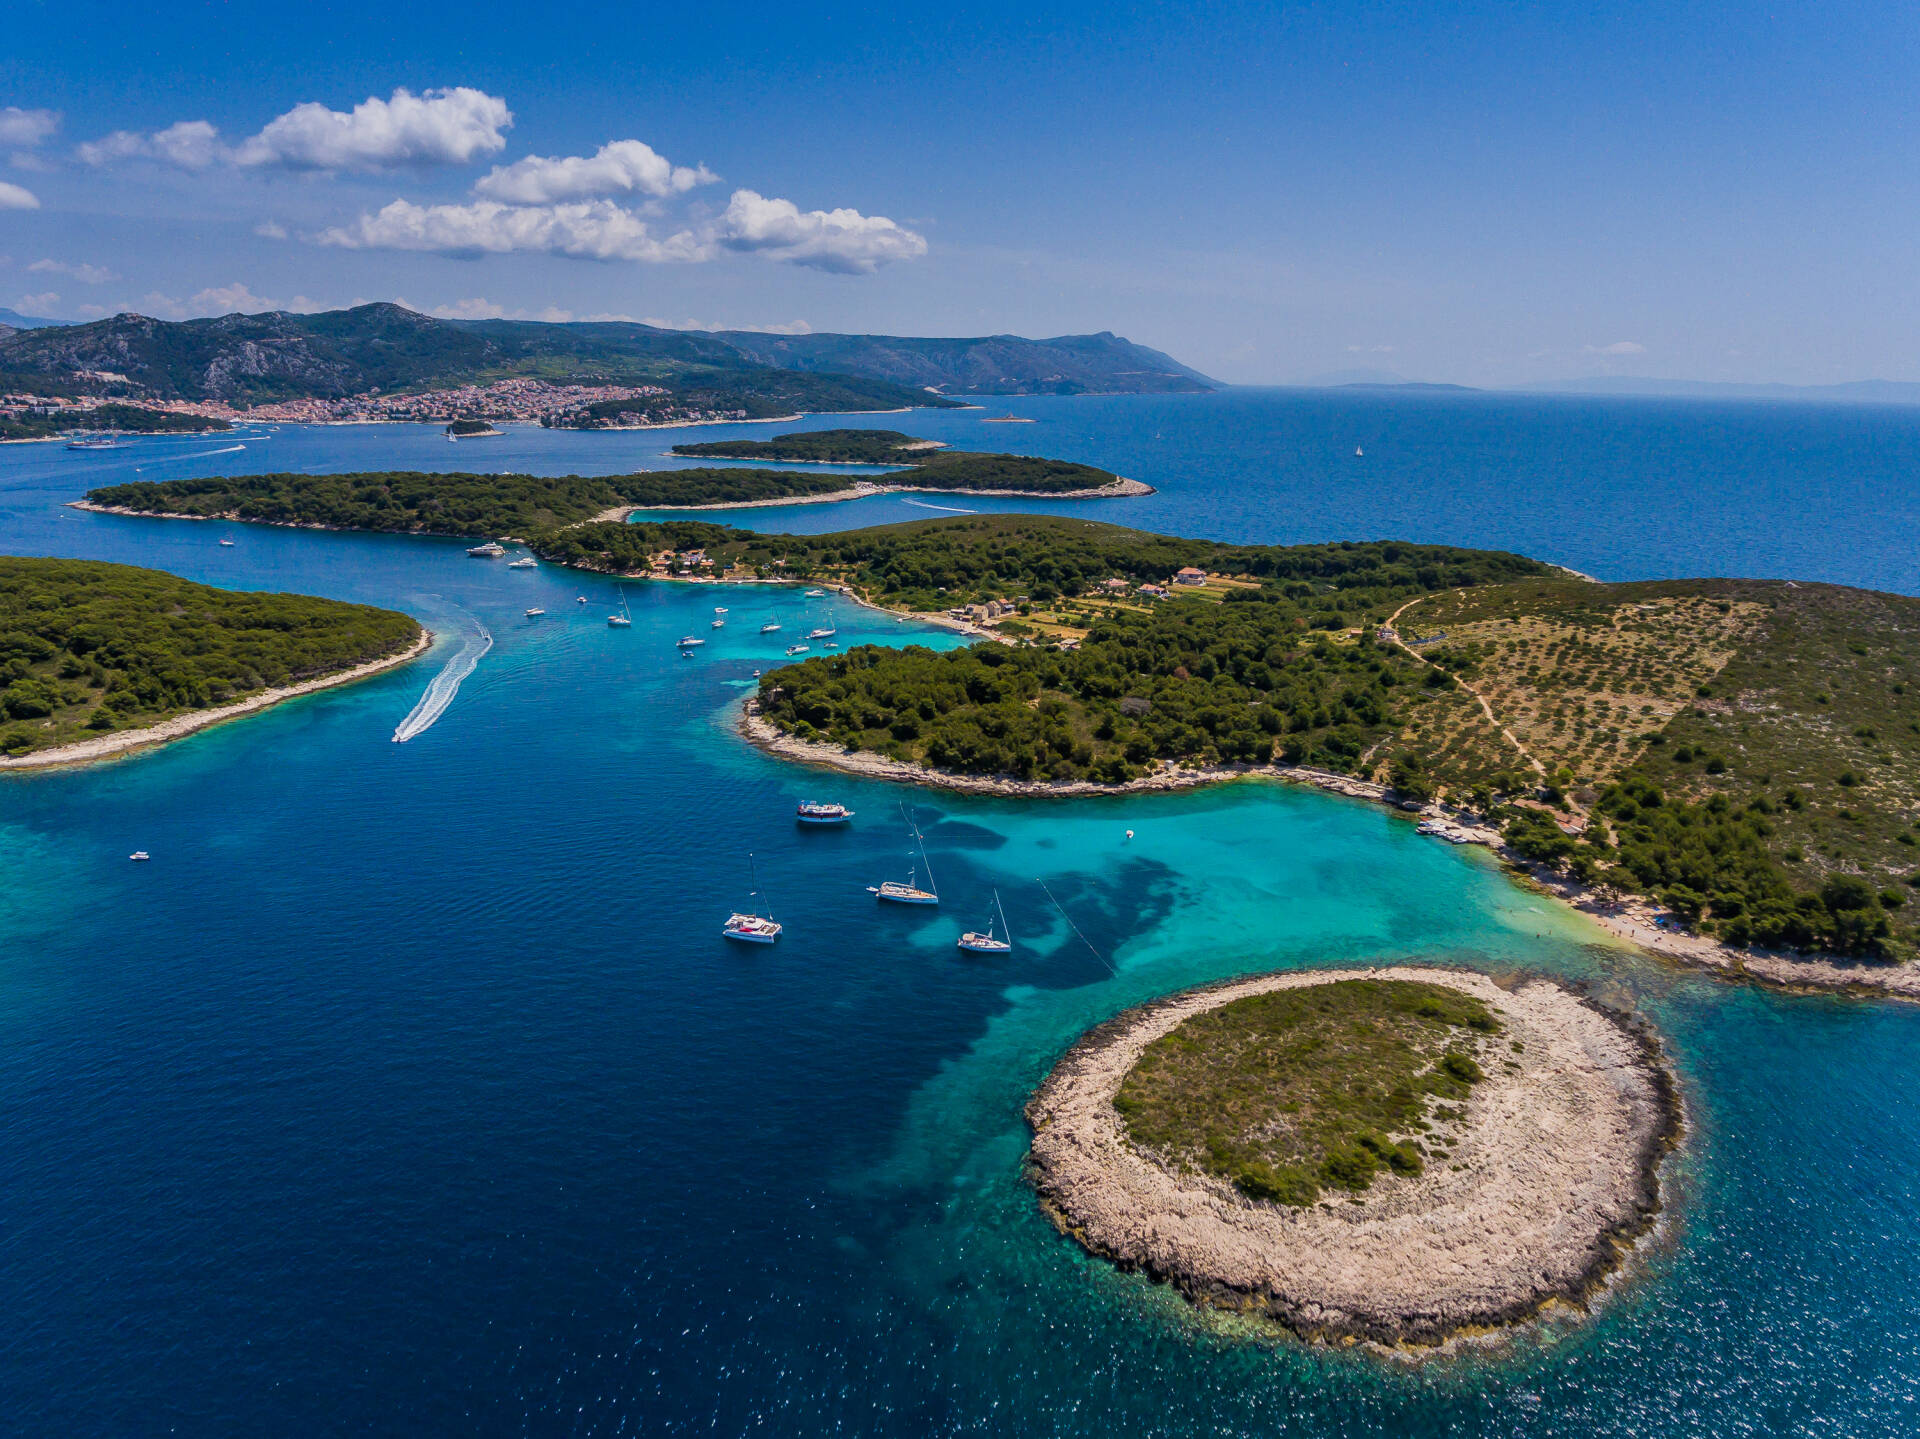 Let us find the perfect yacht for your sailing holiday from Vodice.